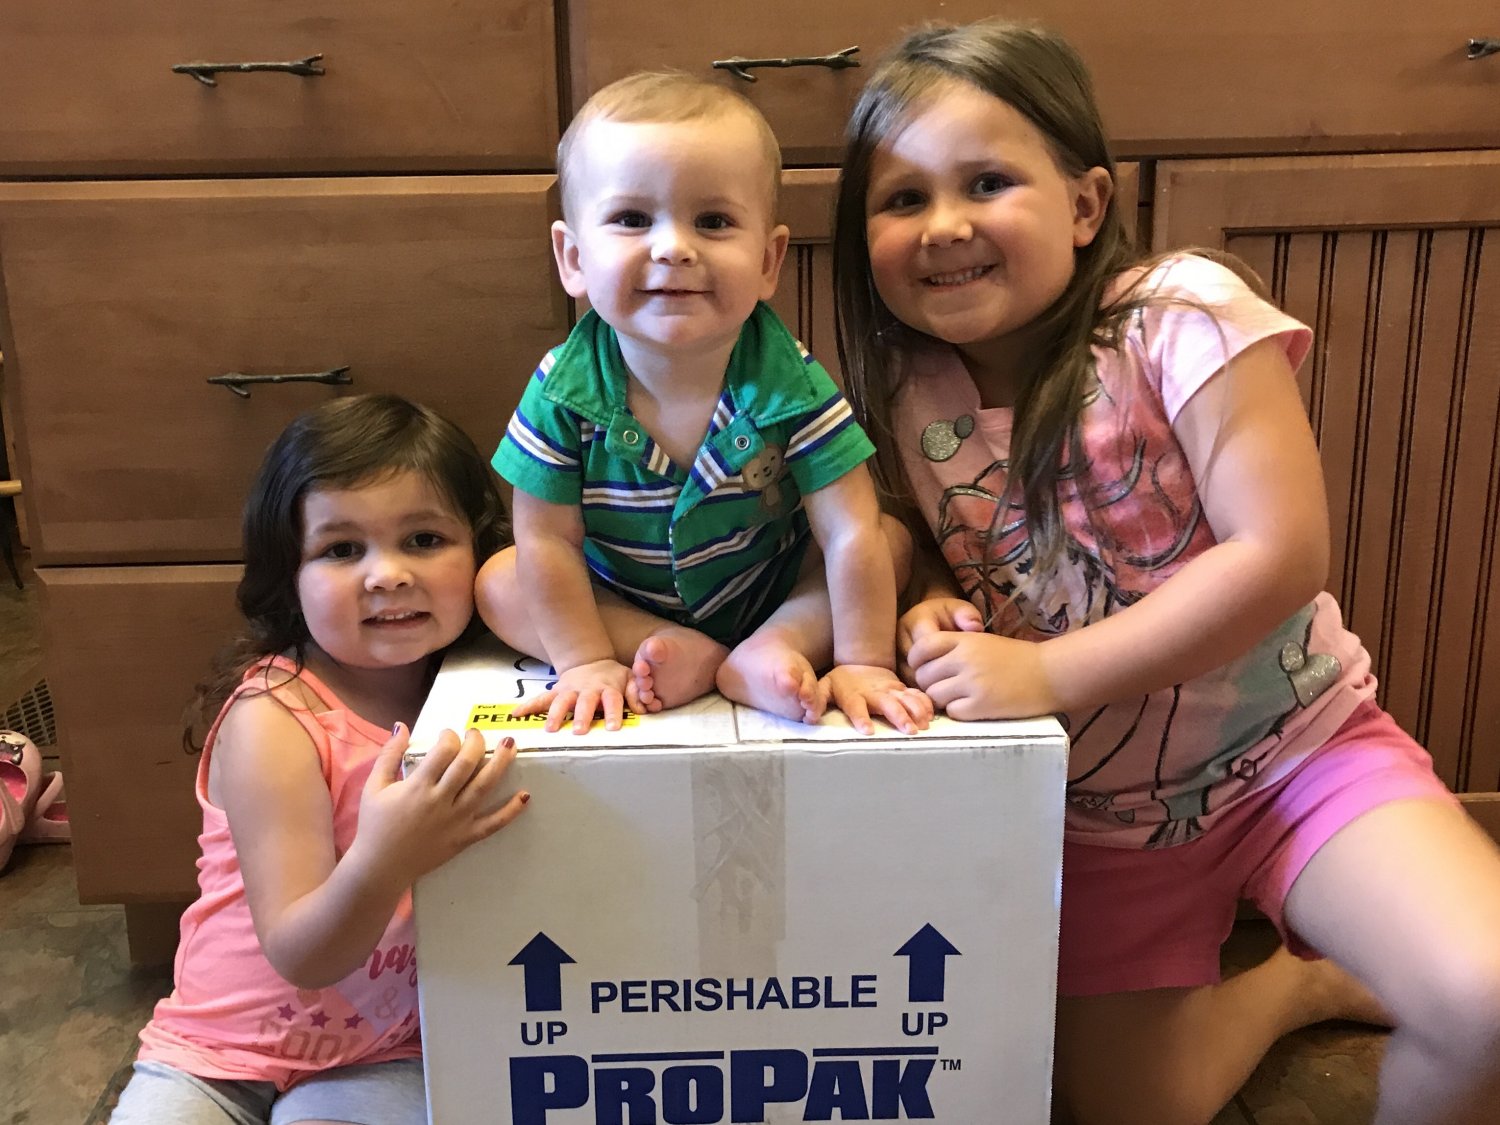 Young girl, toddler girl, and baby boy sit around a box